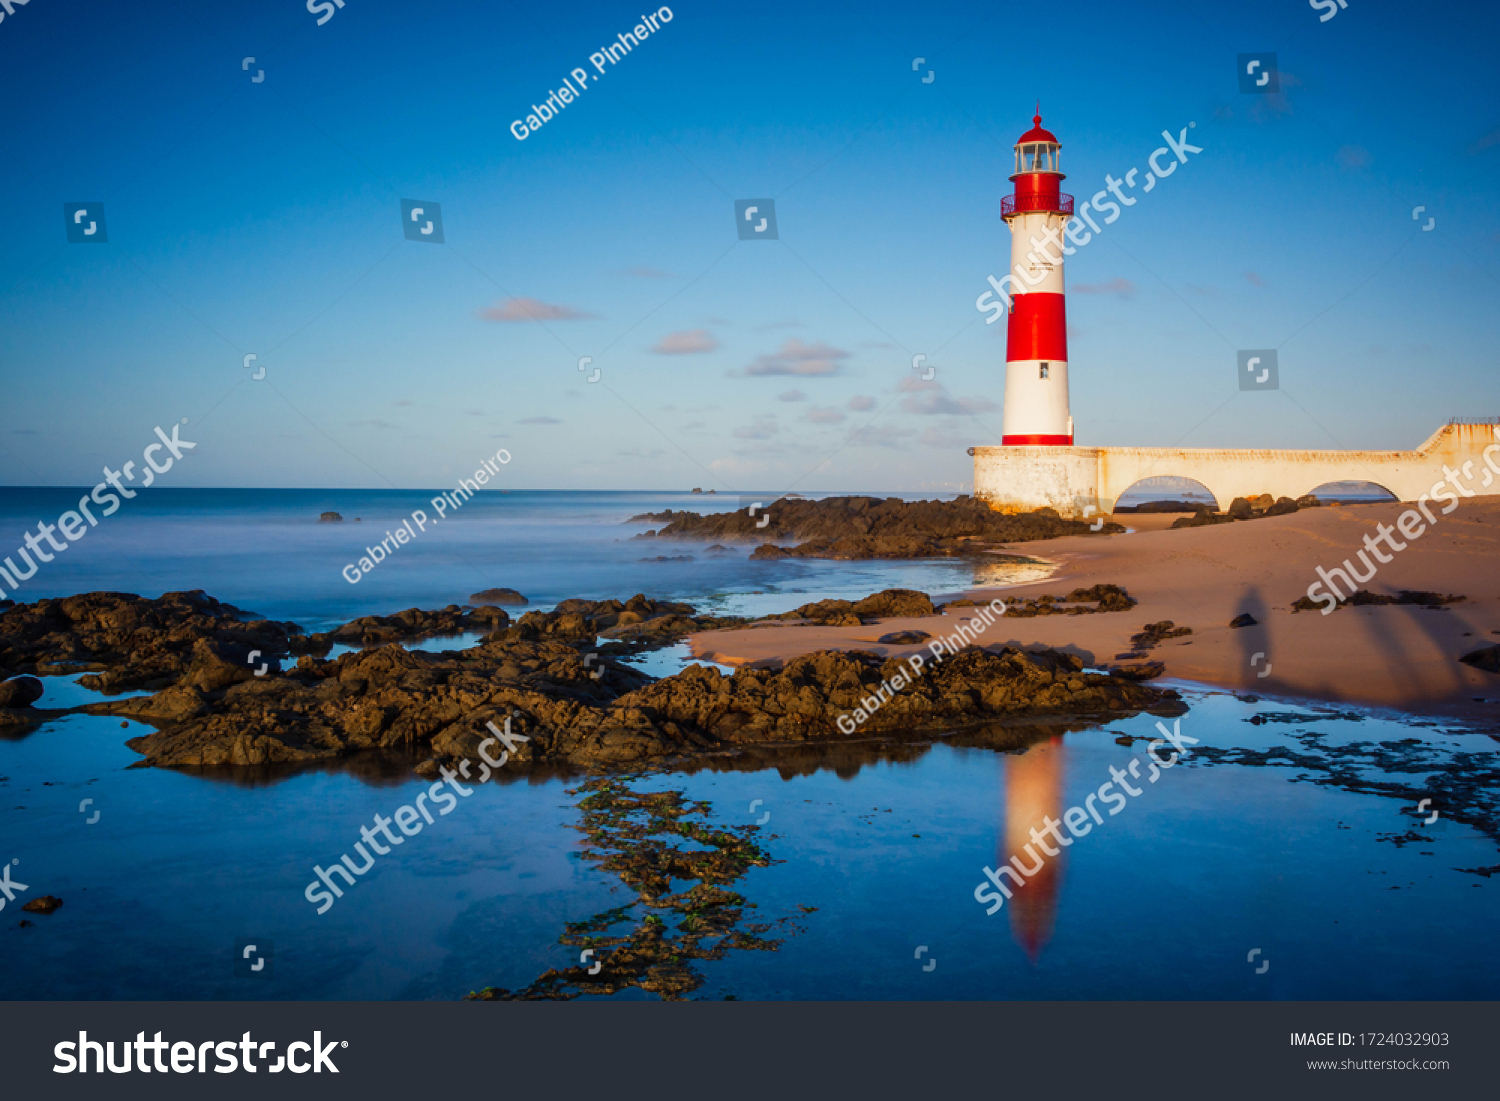 The lighthouse or beacon Itapuã Tip Itapuã is a lighthouse in Salvador, Bahia, Brazil. Is located on the beach Itapuã in Itapoan subdistrict, about 23 kilometers (14 mi) northeast are the Lighthouse  #1724032903